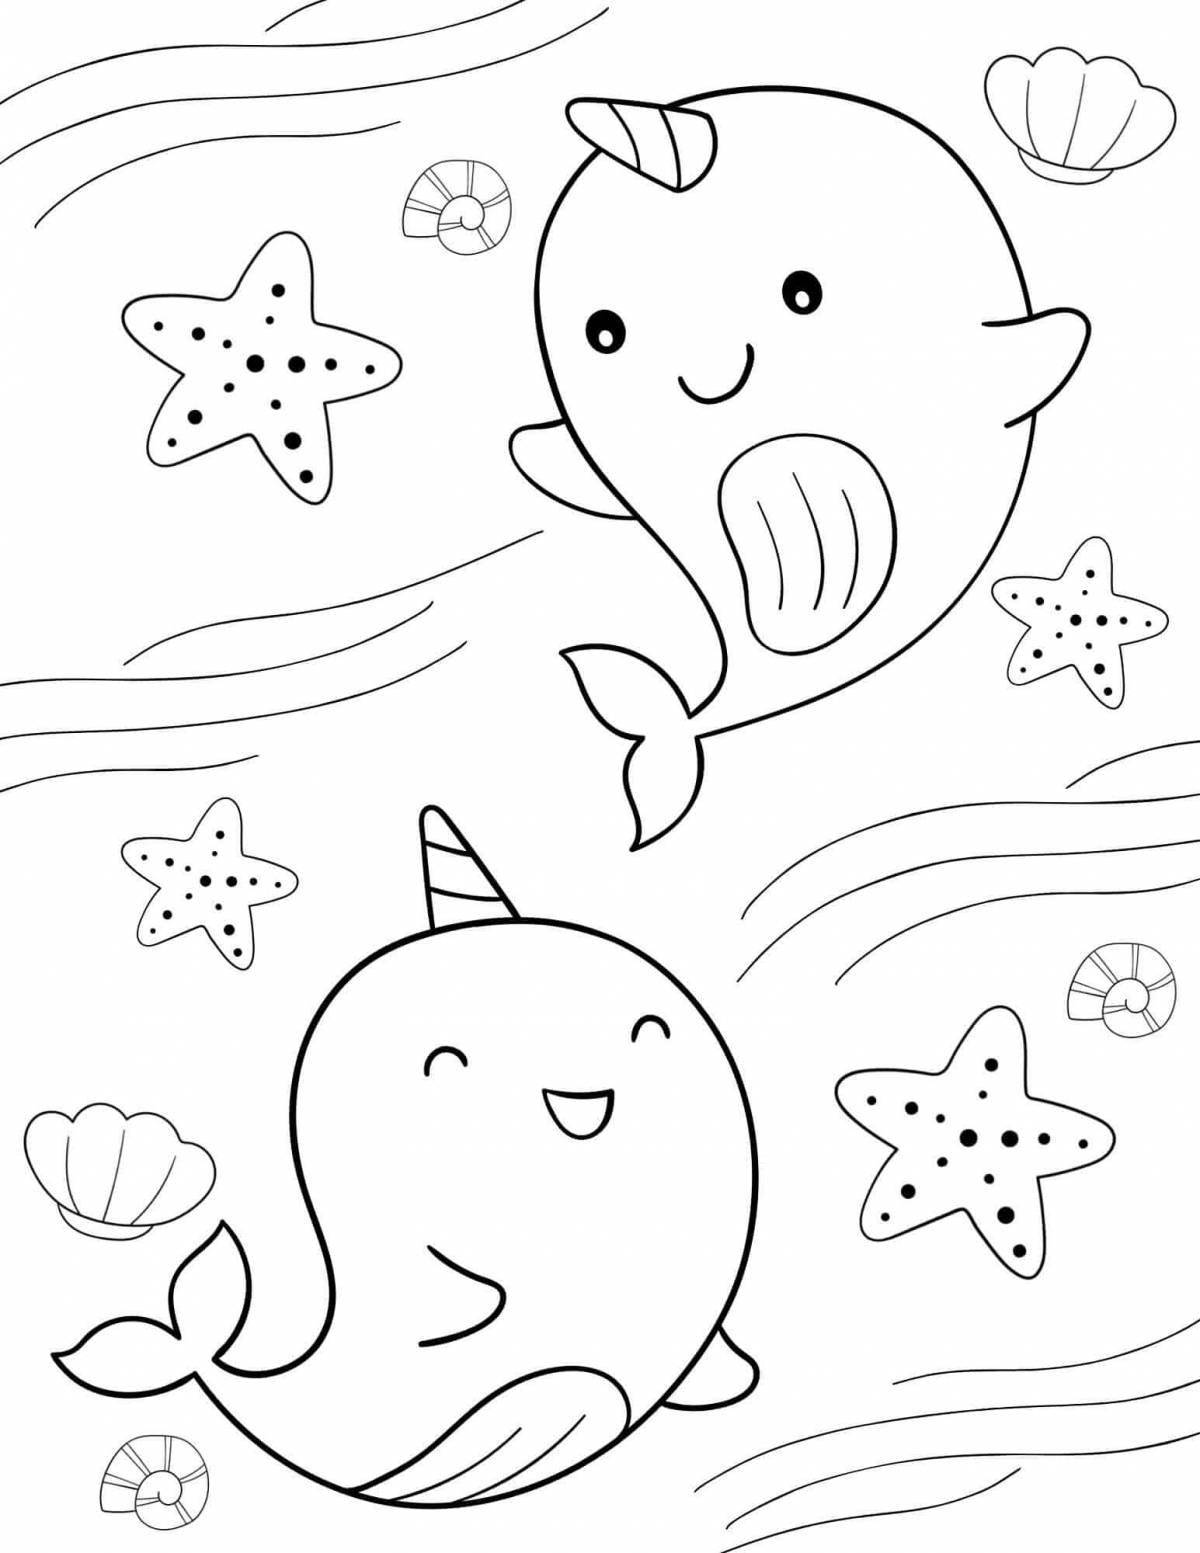 Playful narwhal coloring book